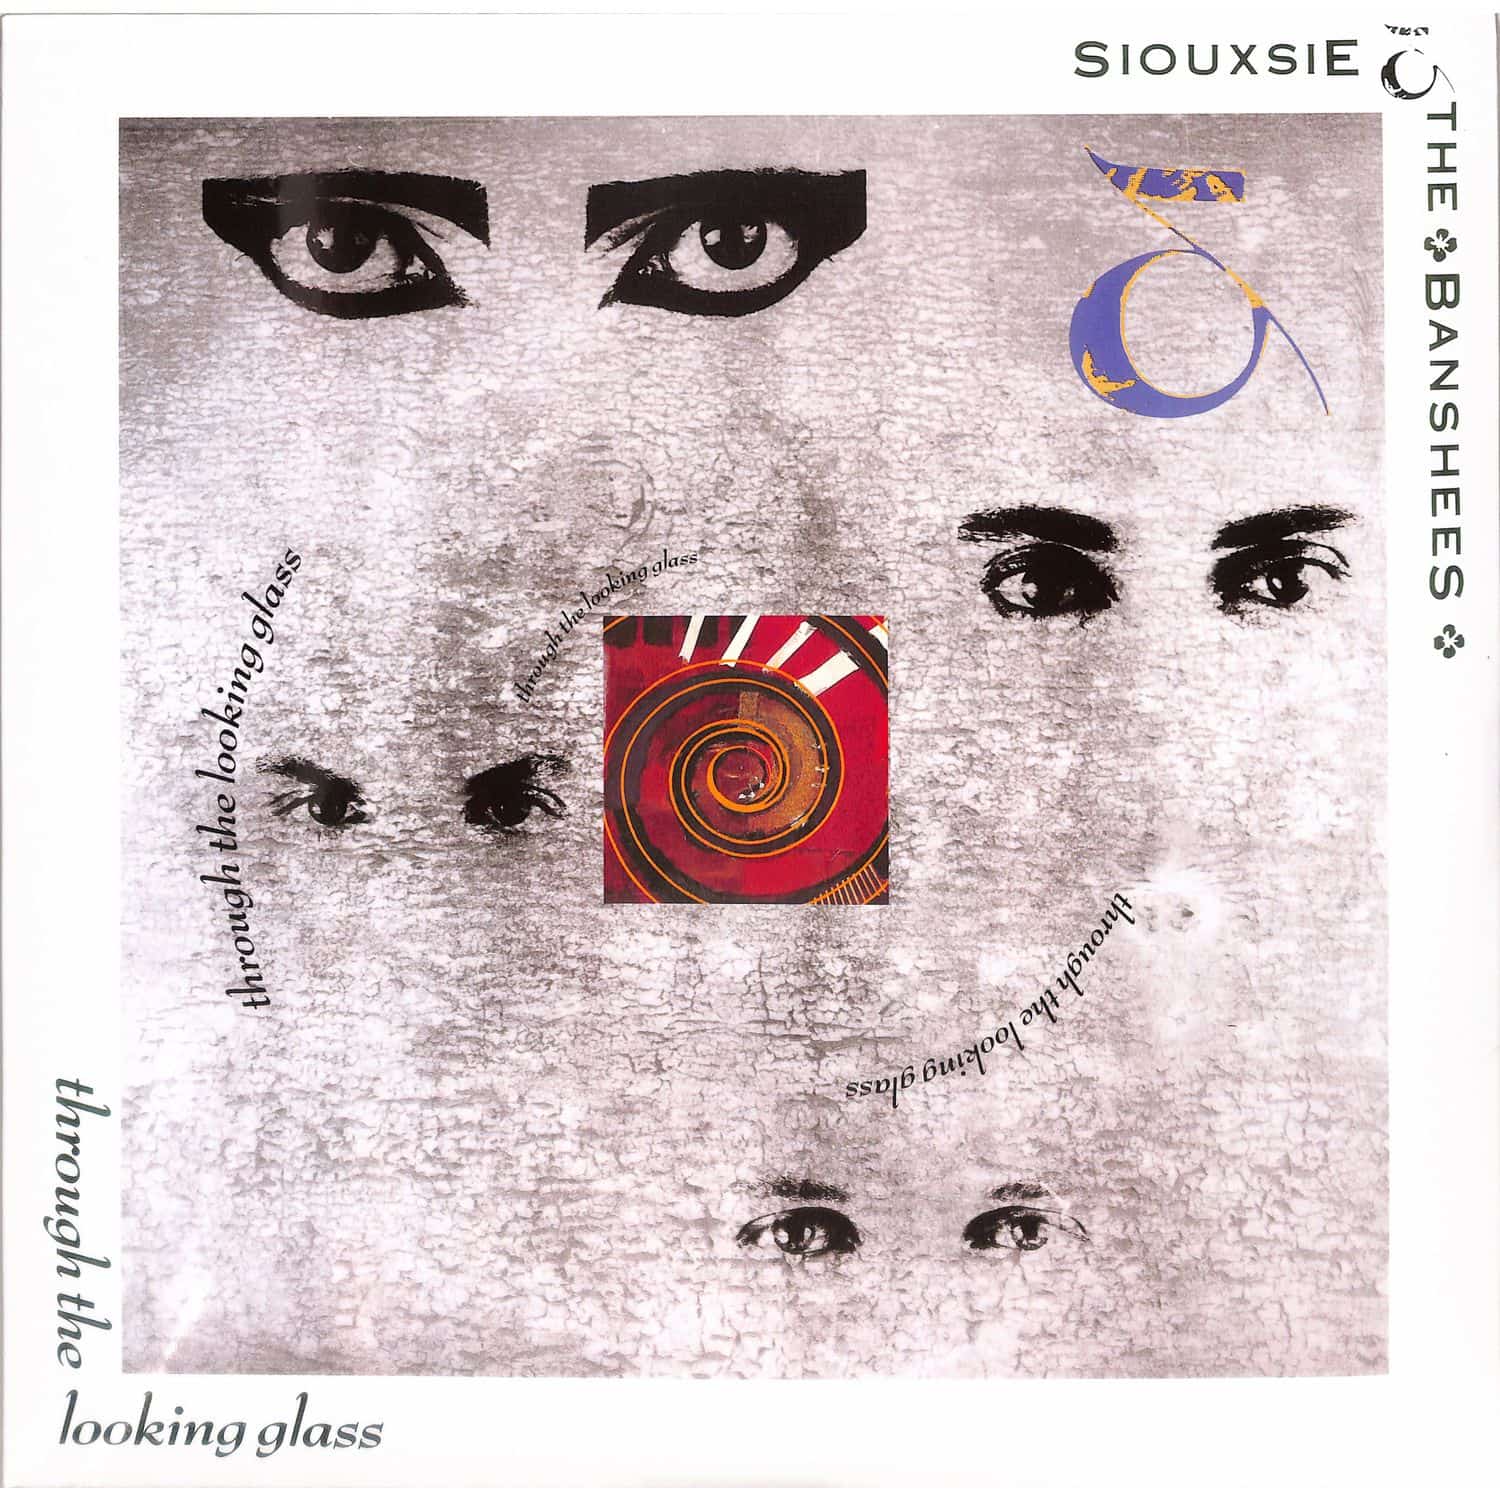 Siouxsie And The Banshees - THROUGH THE LOOKING GLASS